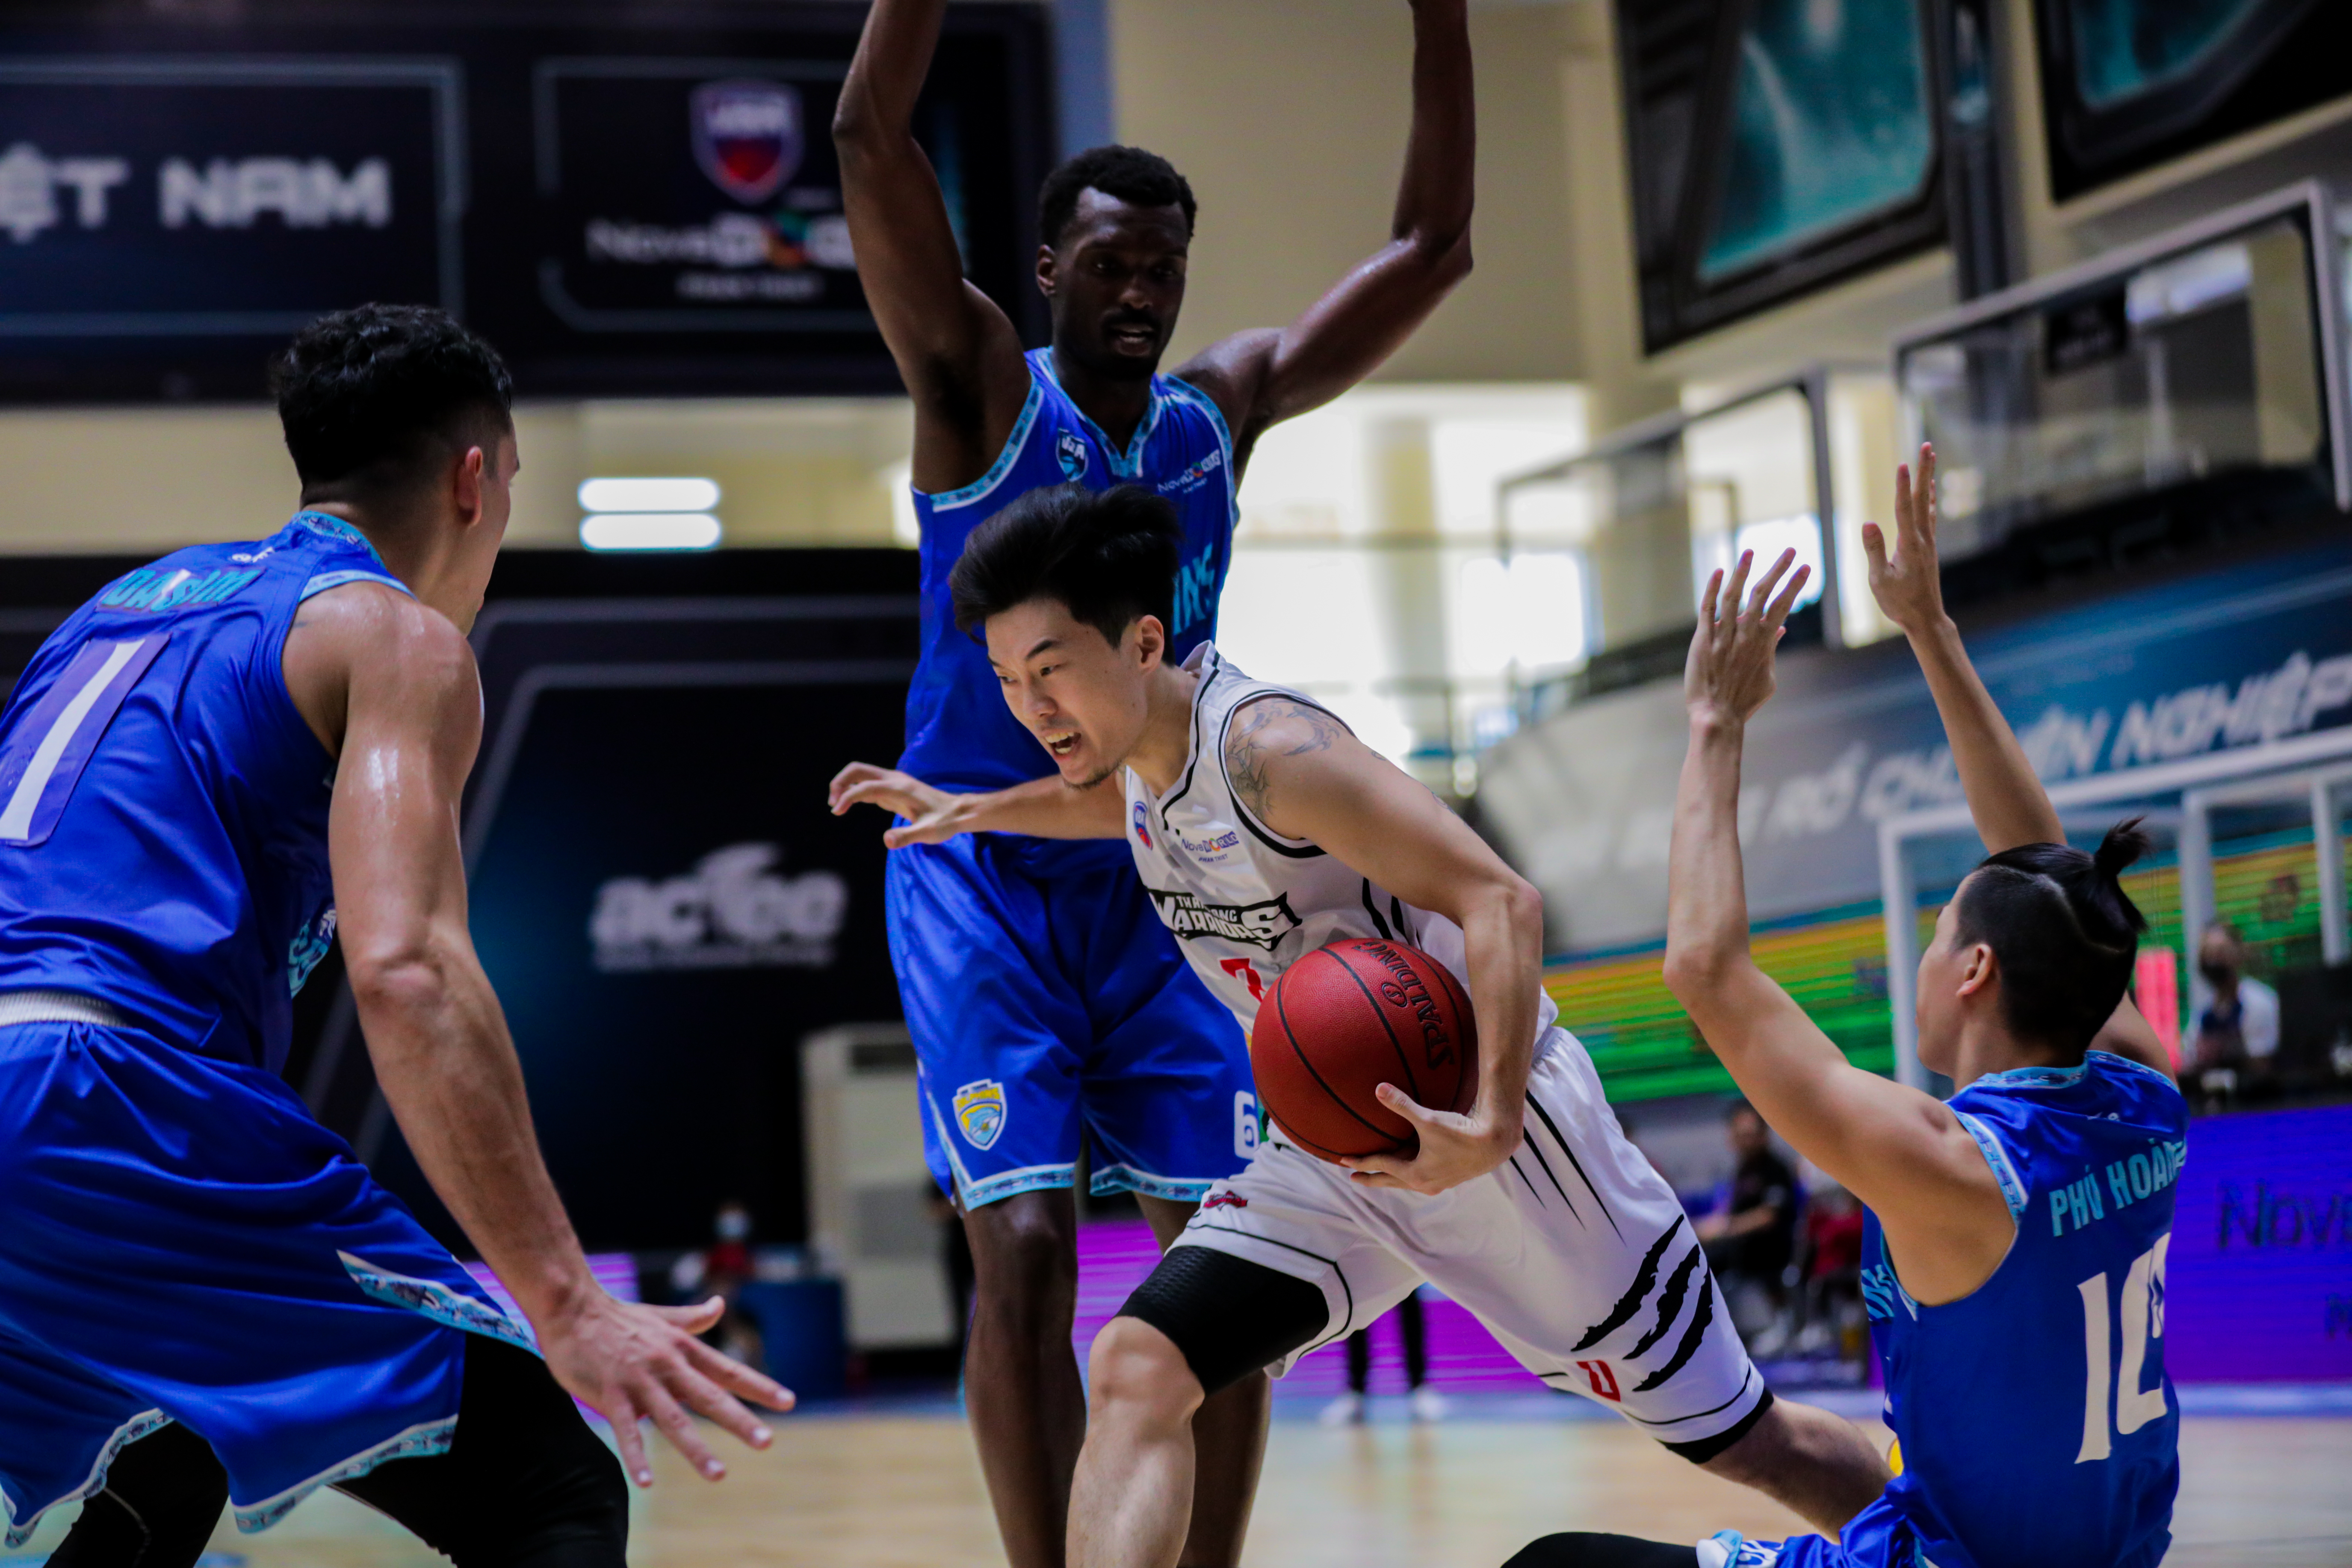 The Thang Long Warriors’ Hong Gia Lan (white jersey) dribbles past opponents in a 2021 VBA game. Photo: VBA